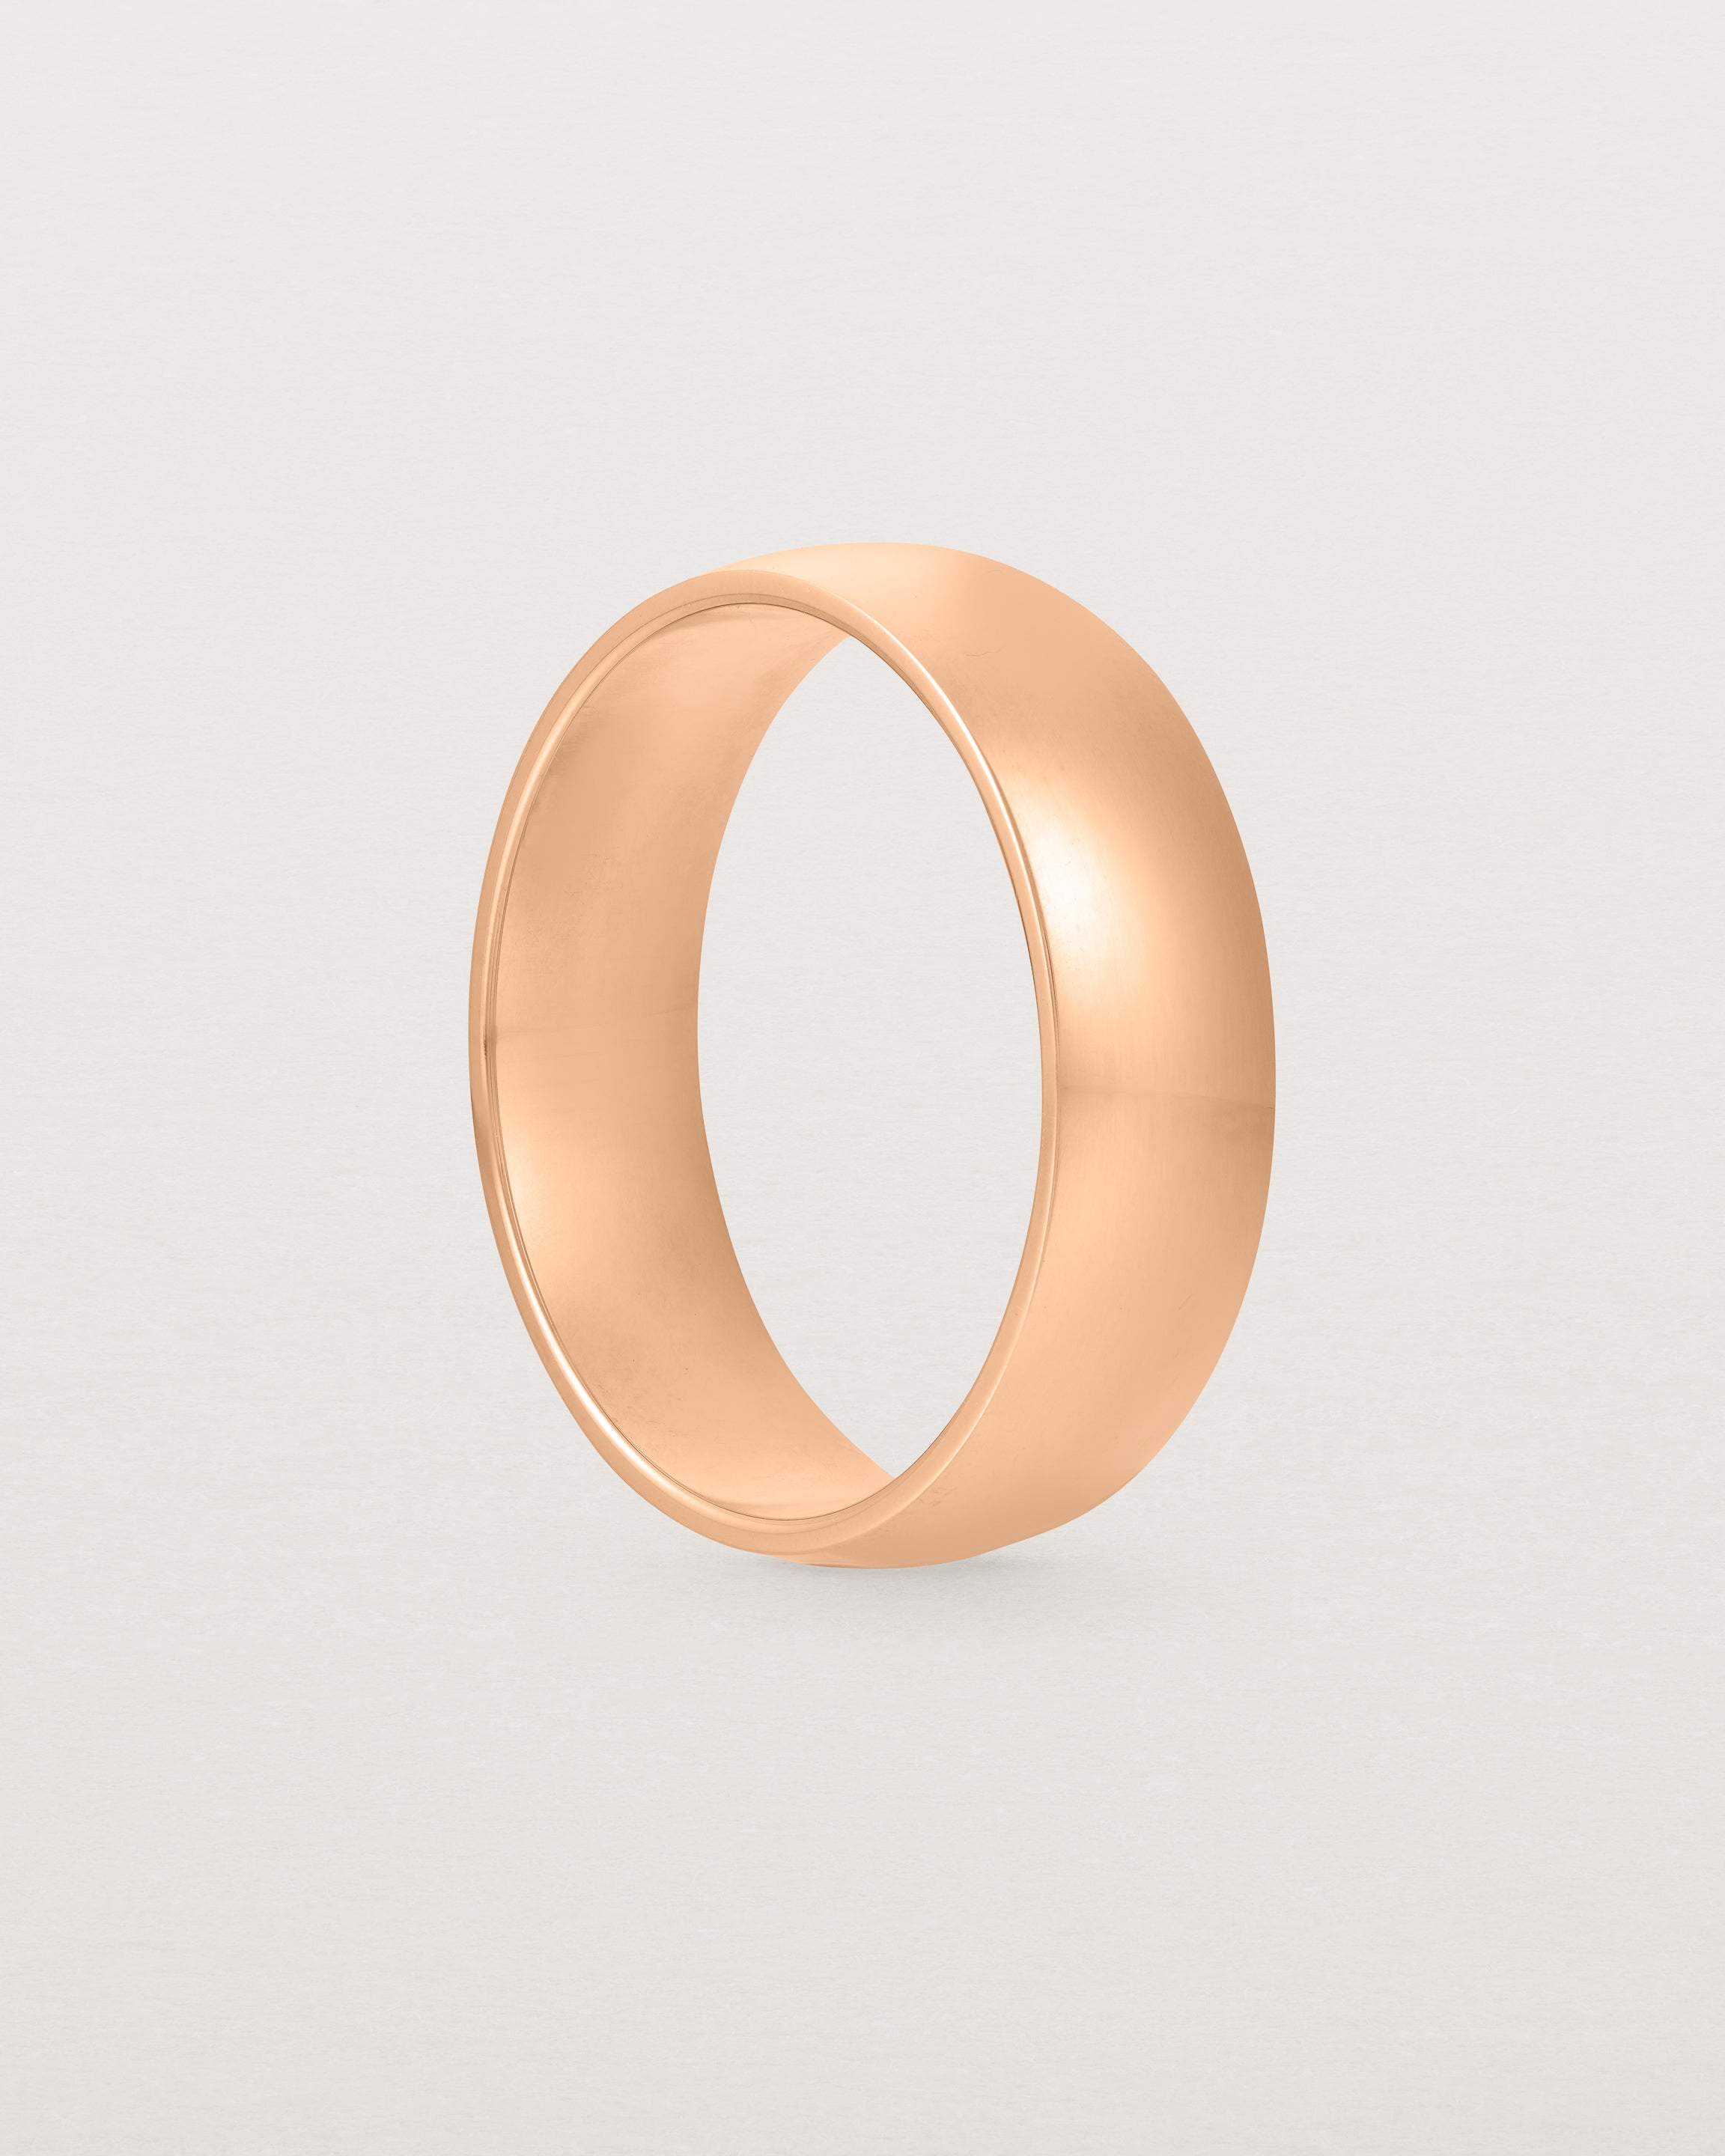 The front view of a 6mm wide heavy wedding ring in rose gold.